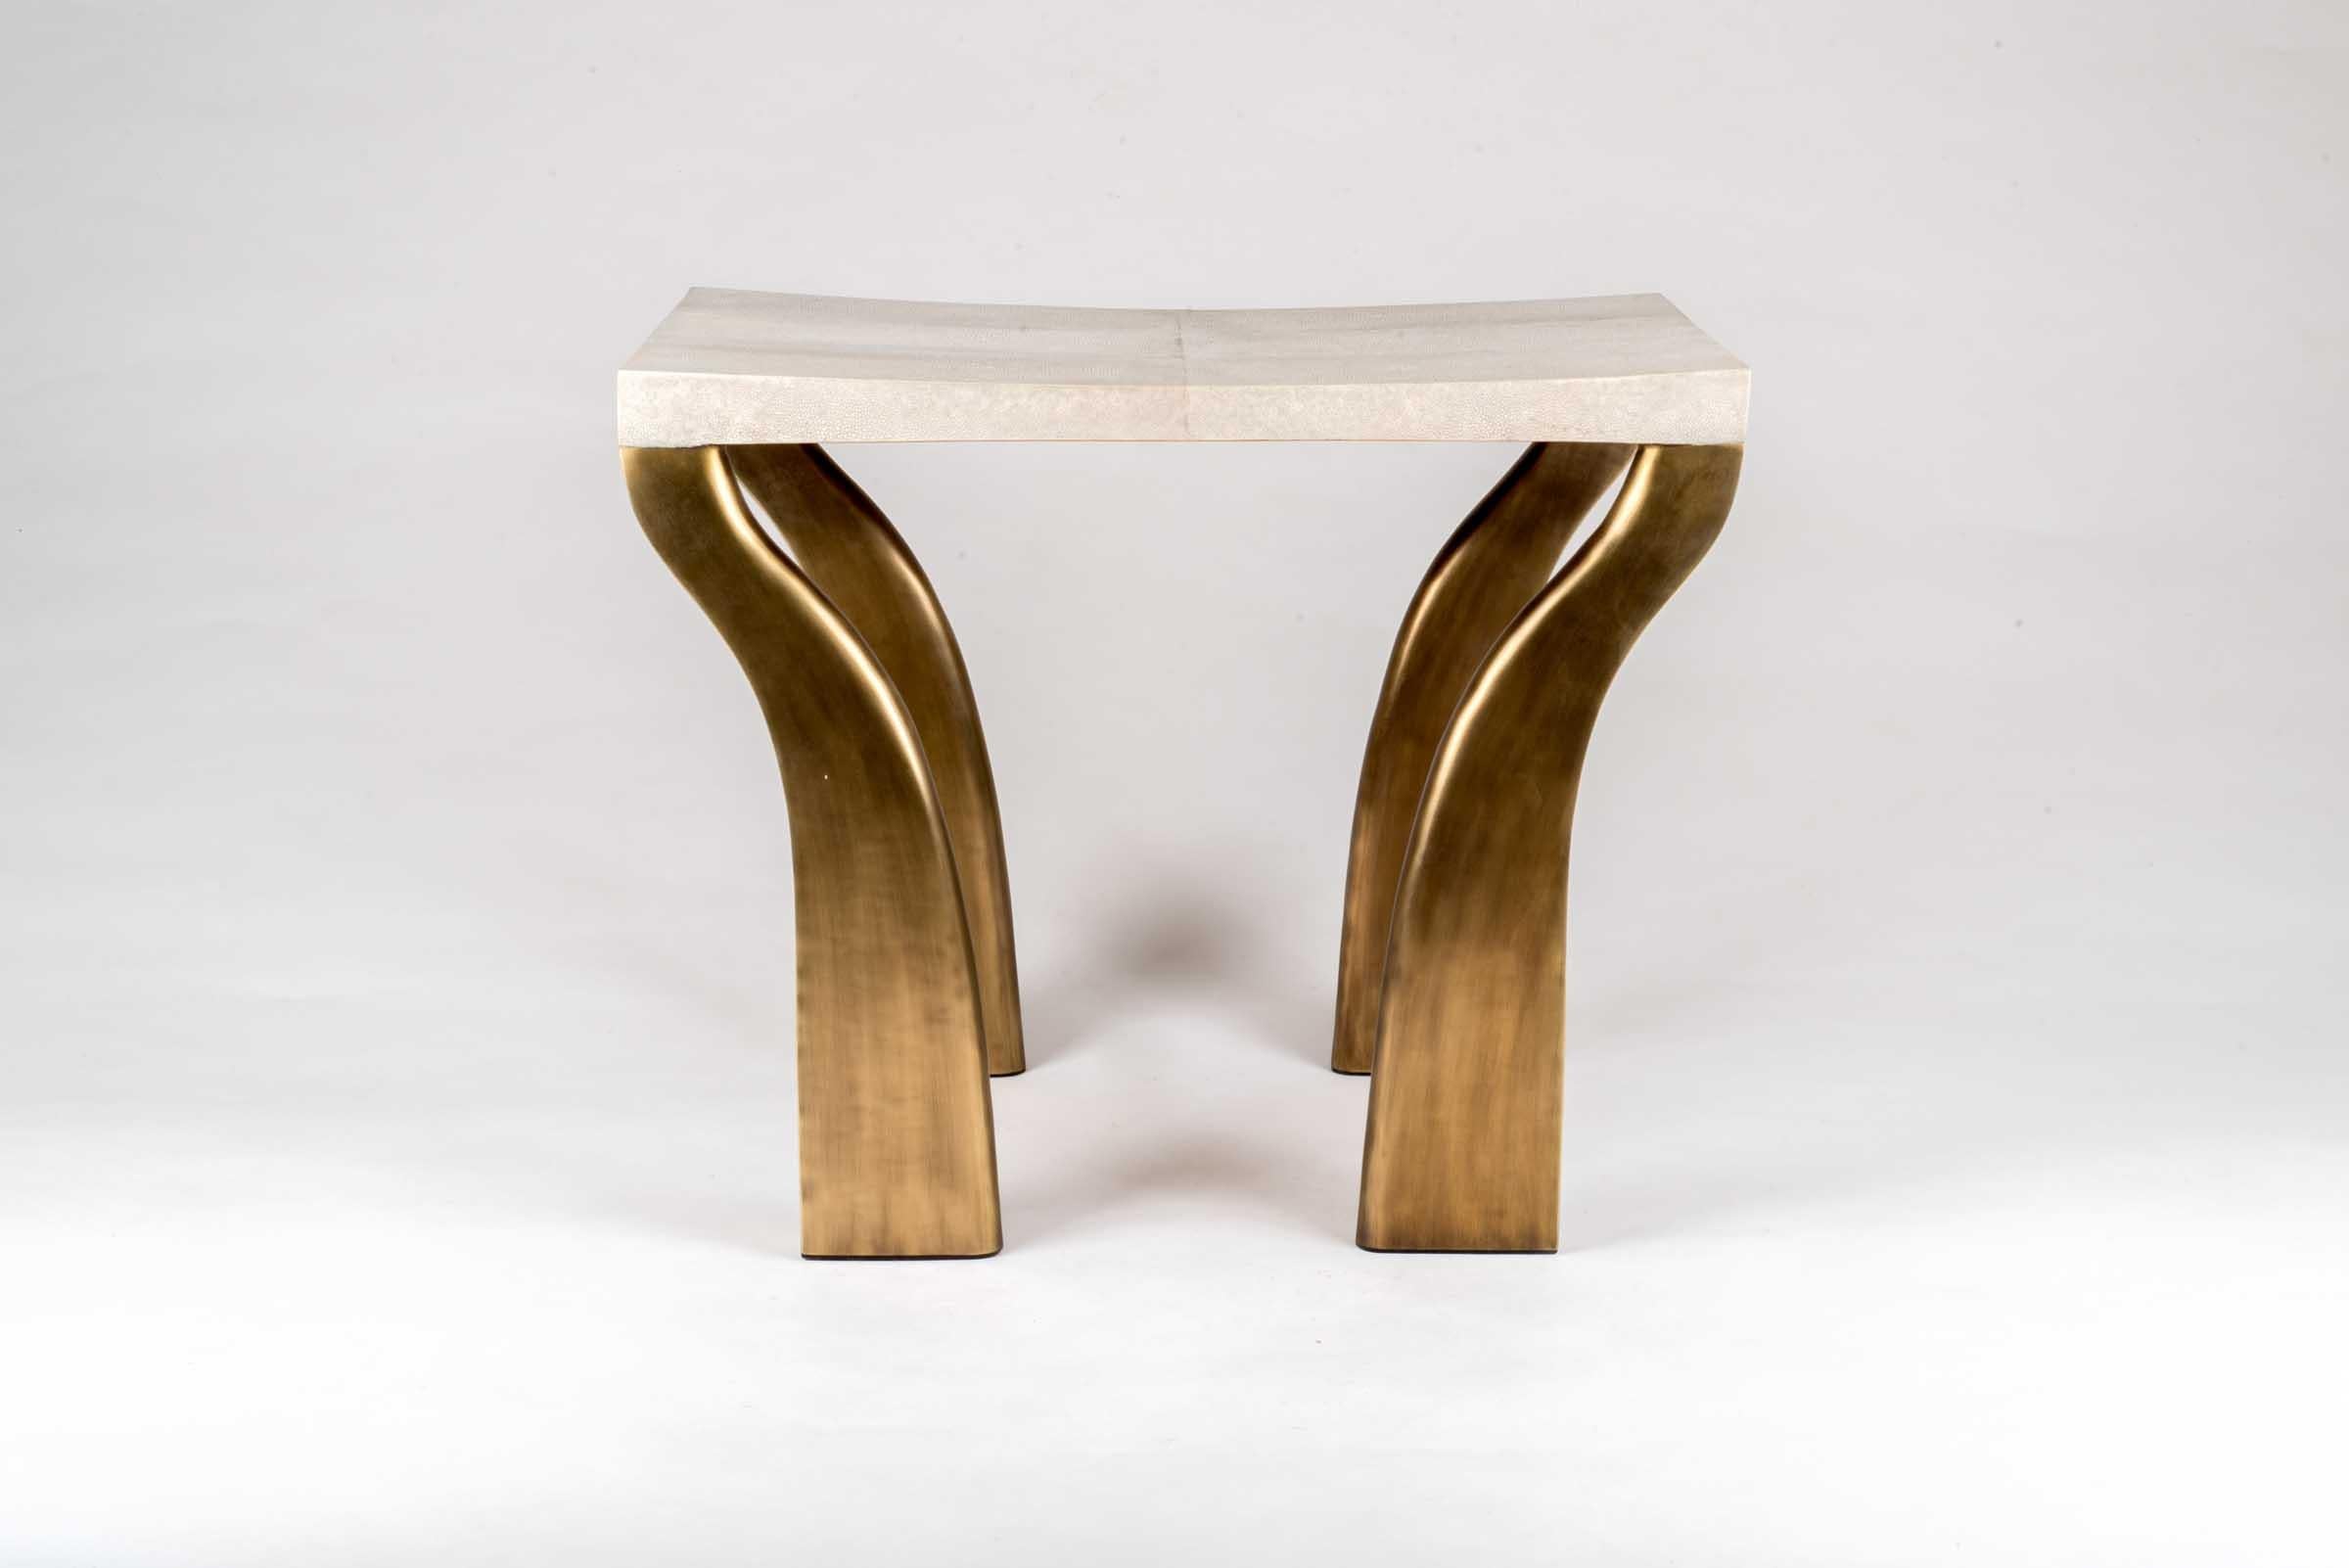 The galaxy writing desk stool in cream shagreen, is a sculptural and sleek piece with its beautiful bronze-patina brass legs. This piece was designed to be paired with the beautiful galaxy writing Desk, see image at end of slide. The shagreen is